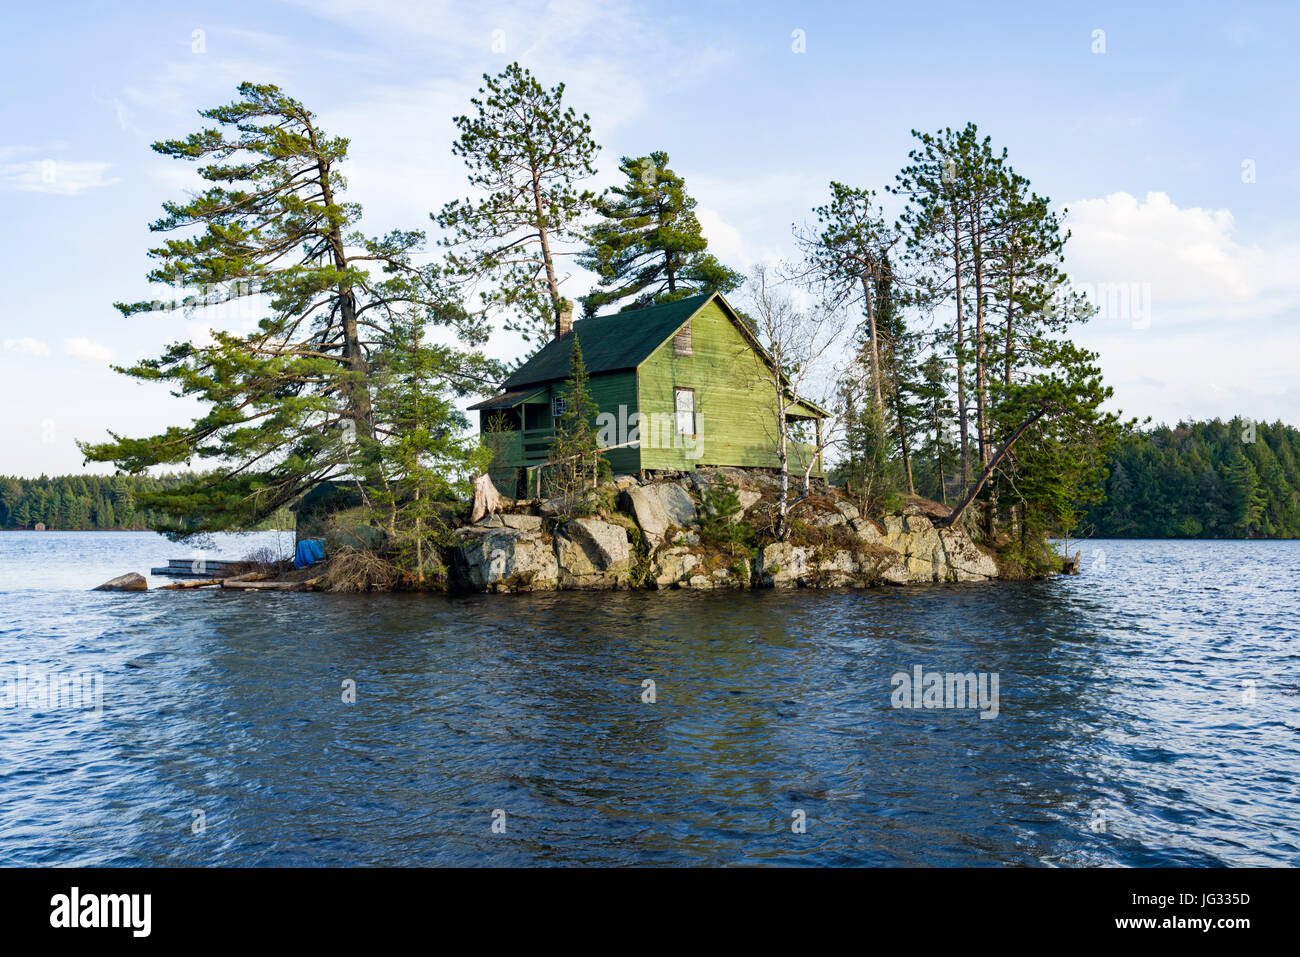 Wooden House On Small Island Surrounded By Trees And Lake, Algonquin Provincial Park, Ontario, Canada Stock Photo